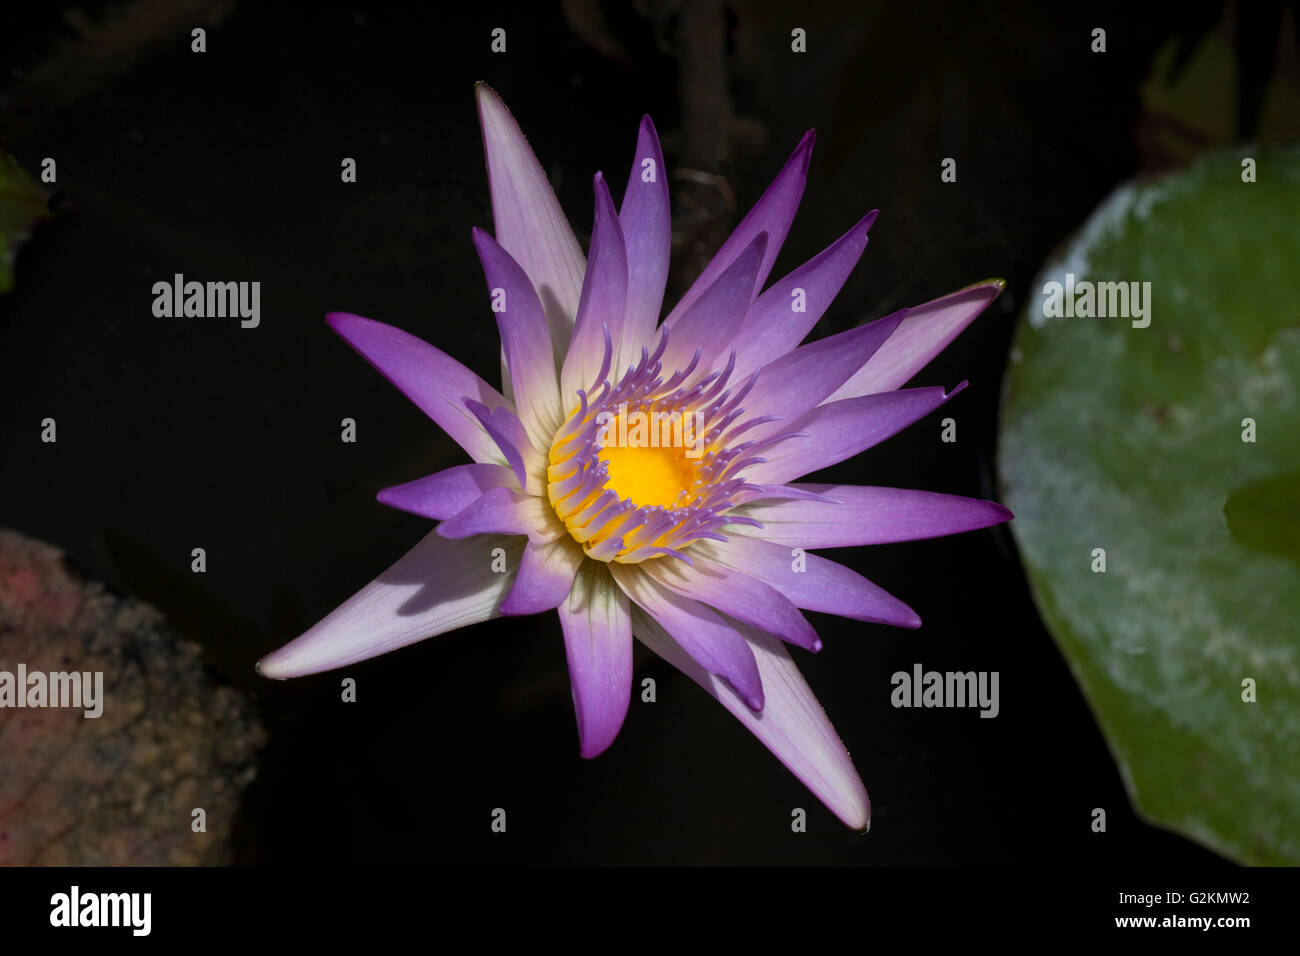 one purple lily with yellow in the midle on dark almost black background Stock Photo